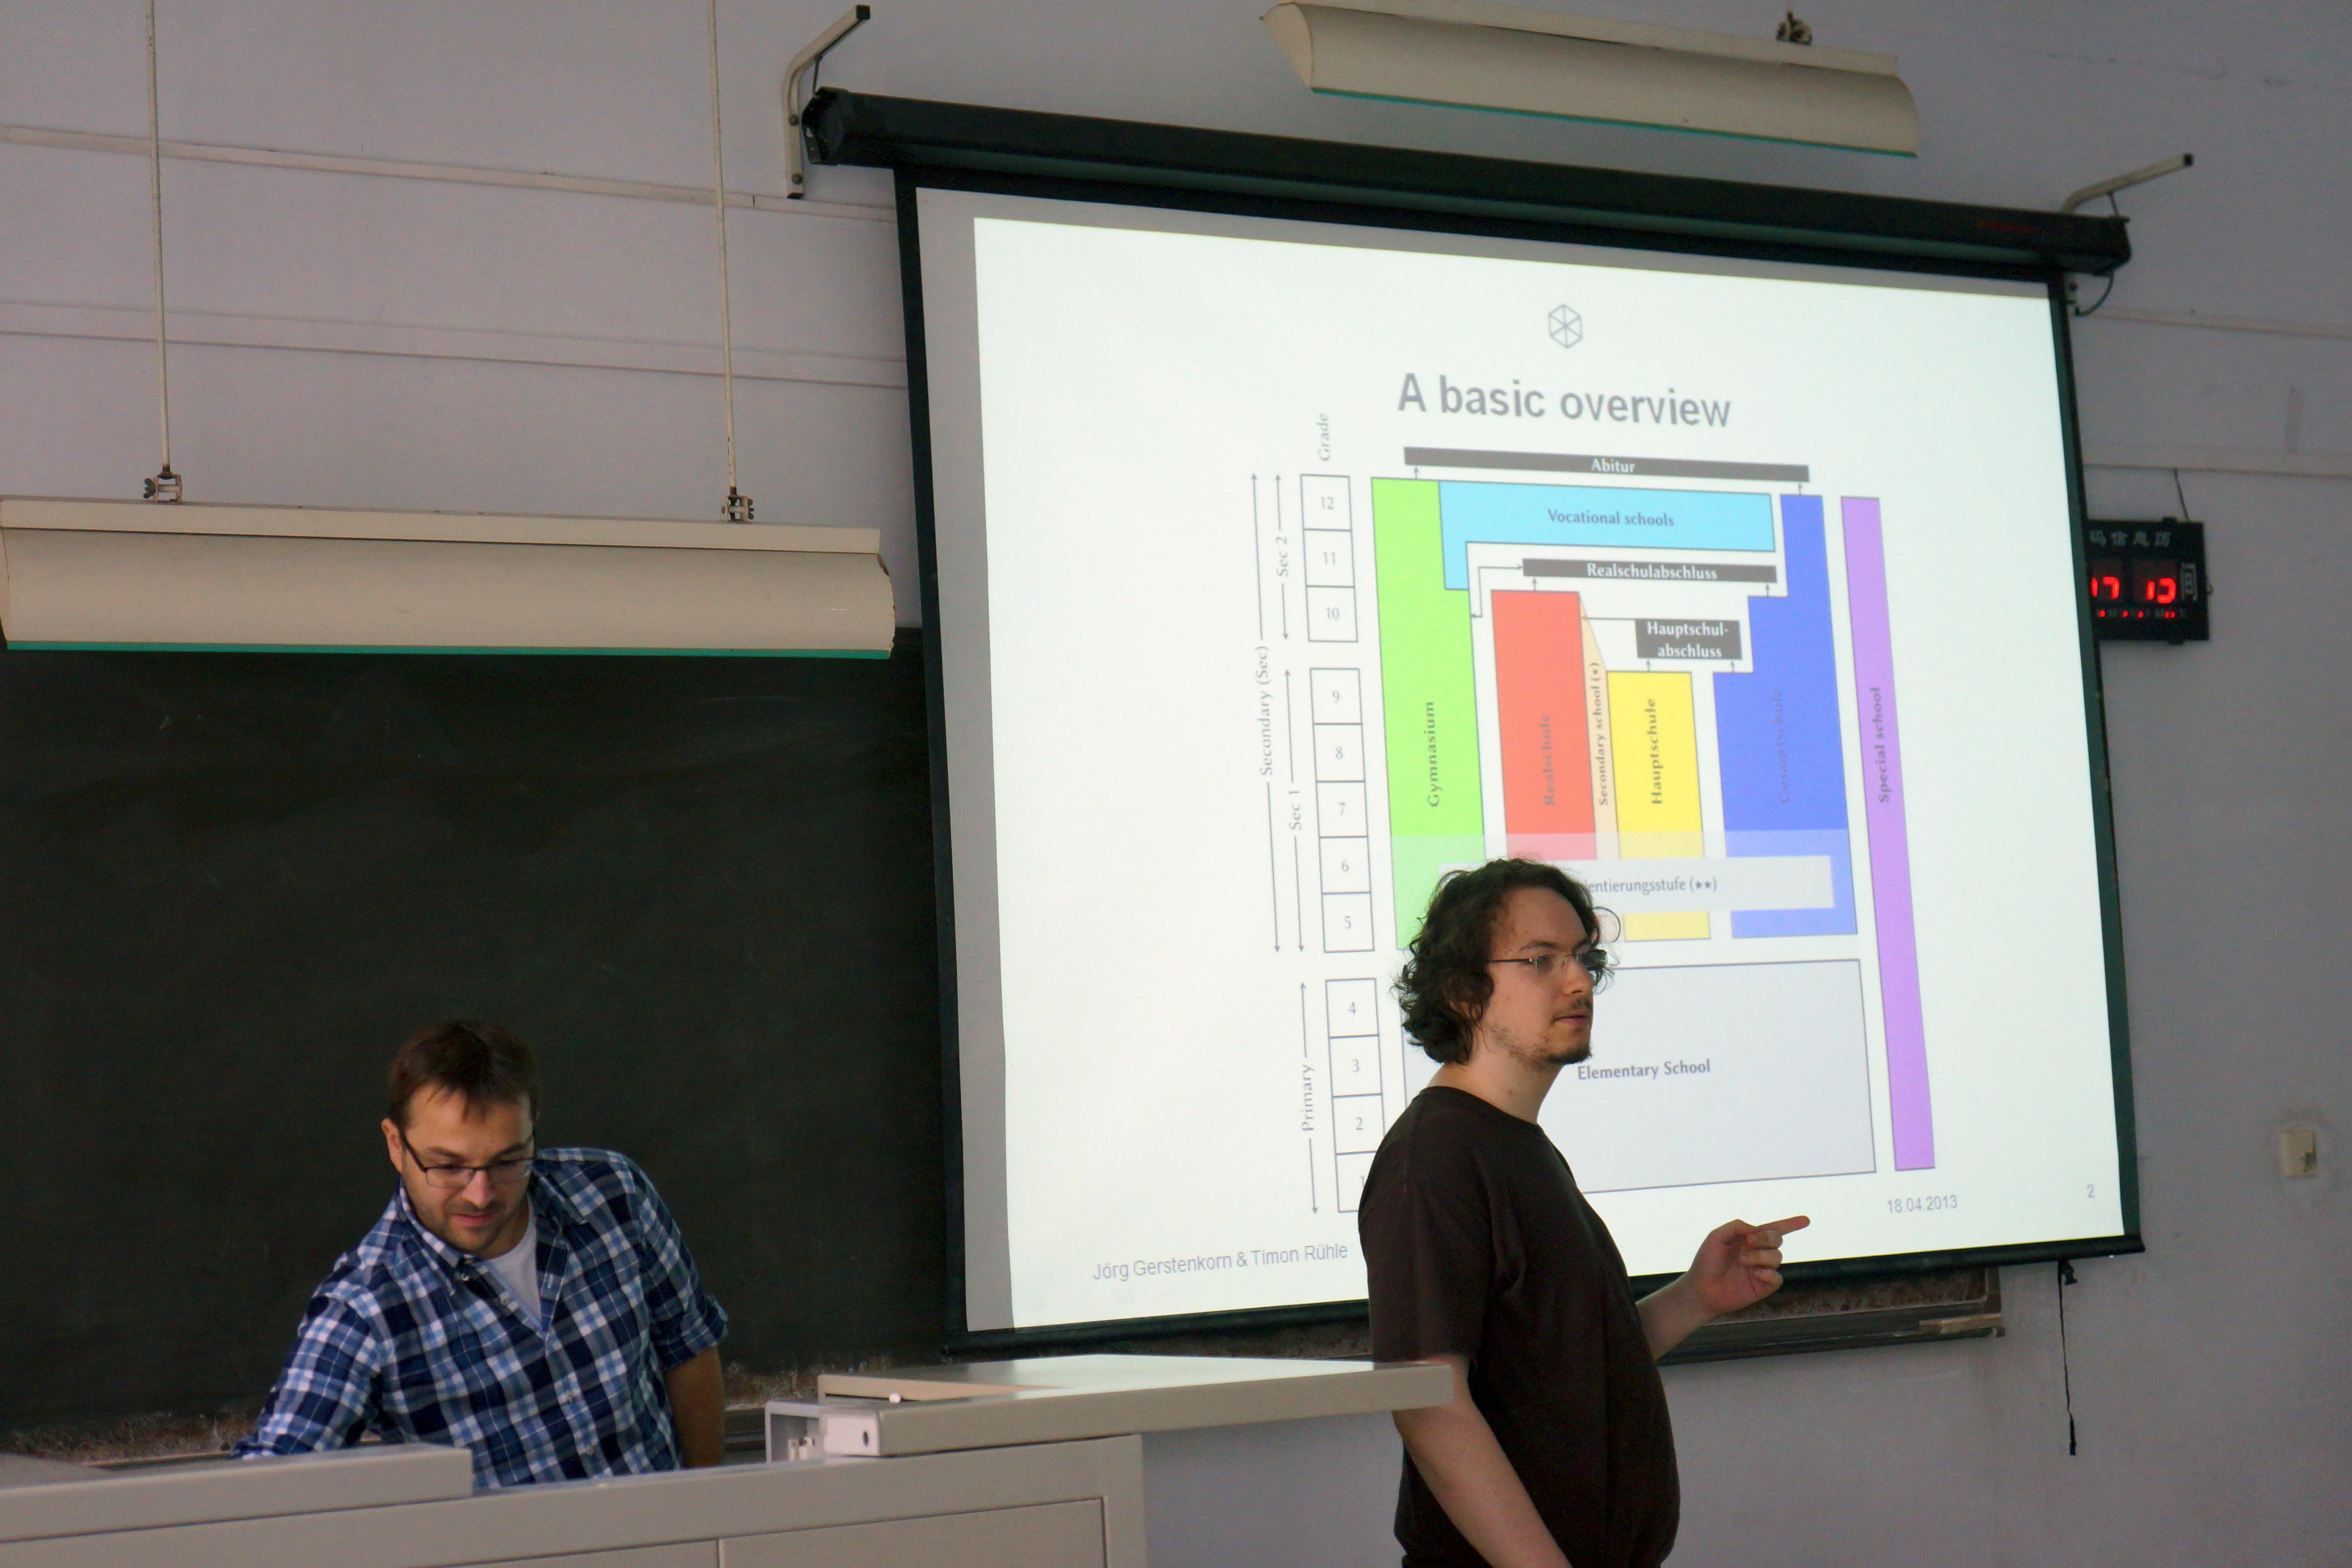 presentations about German education system